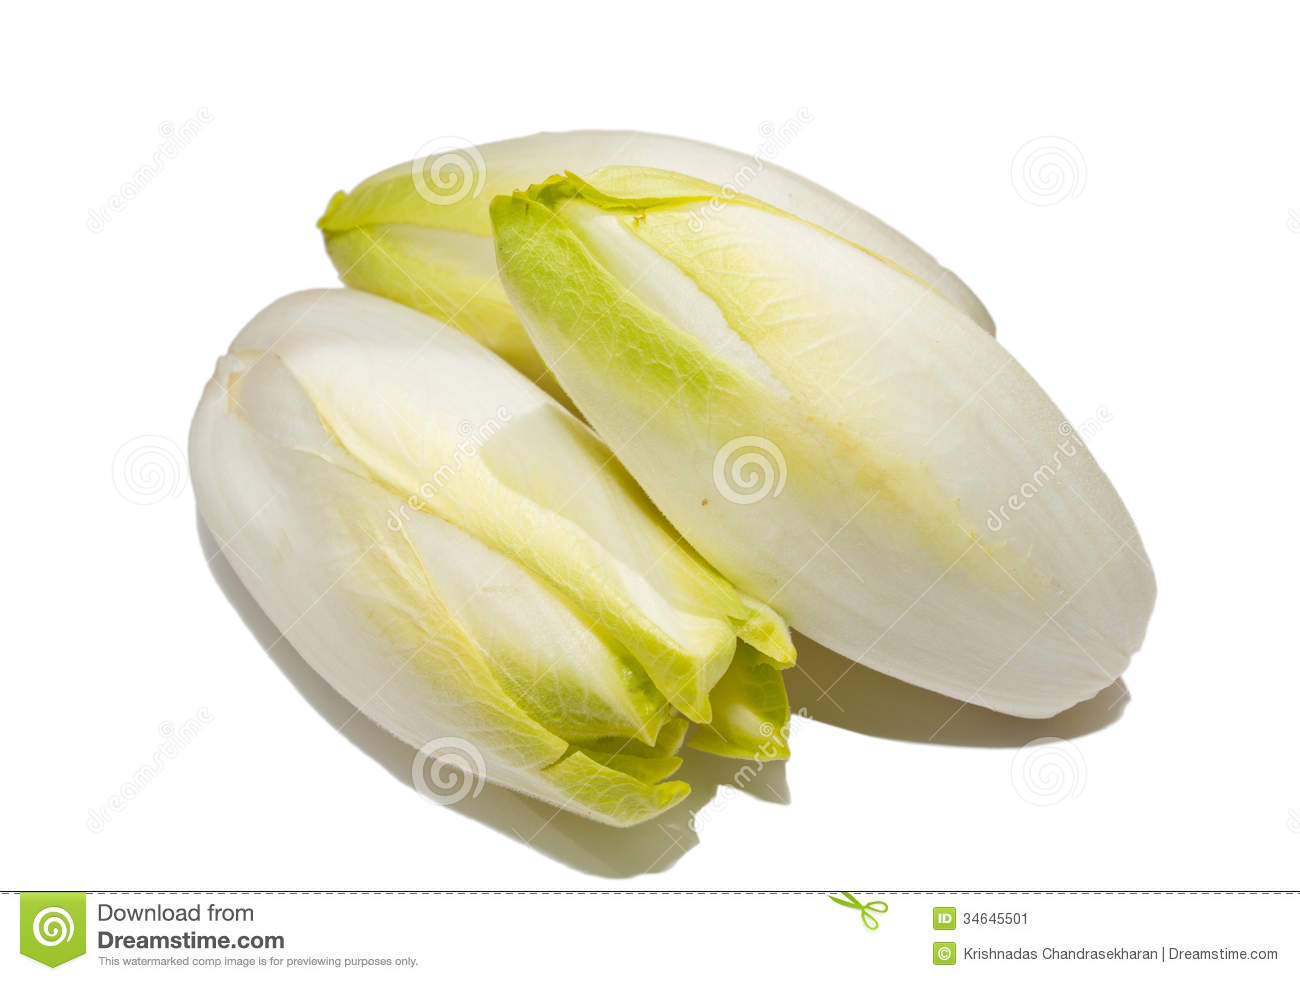 Fresh Chicory Vegetables Stock Photos, Images, & Pictures.